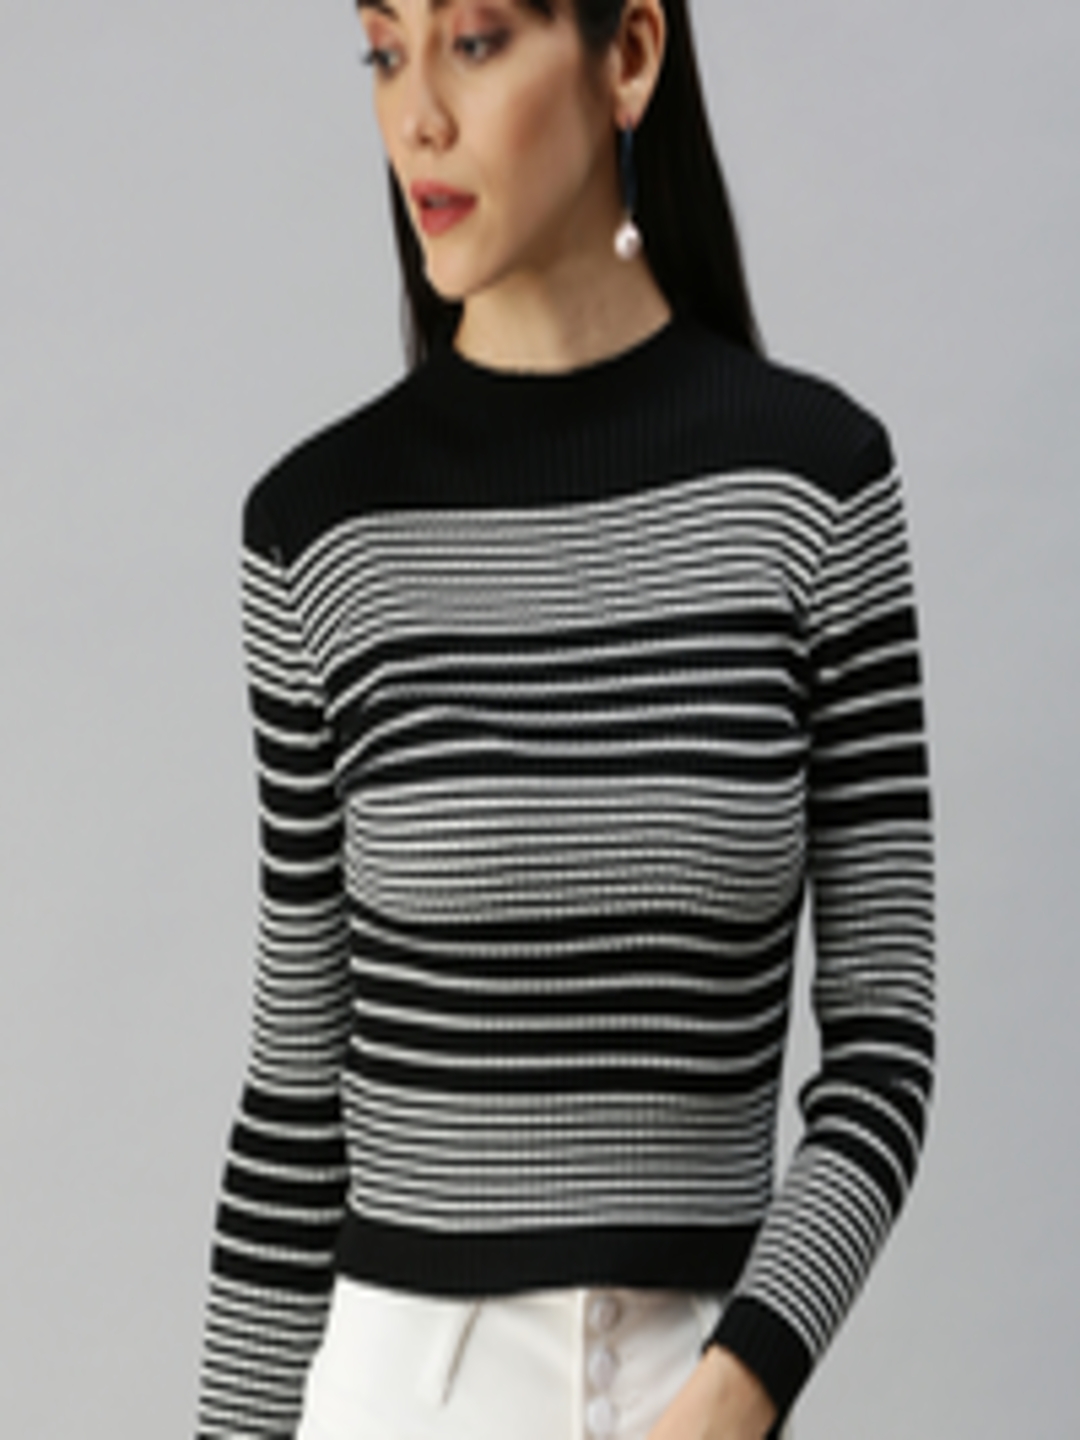 Buy SHOWOFF Black Striped Monochrome Top - Tops for Women 18307240 | Myntra